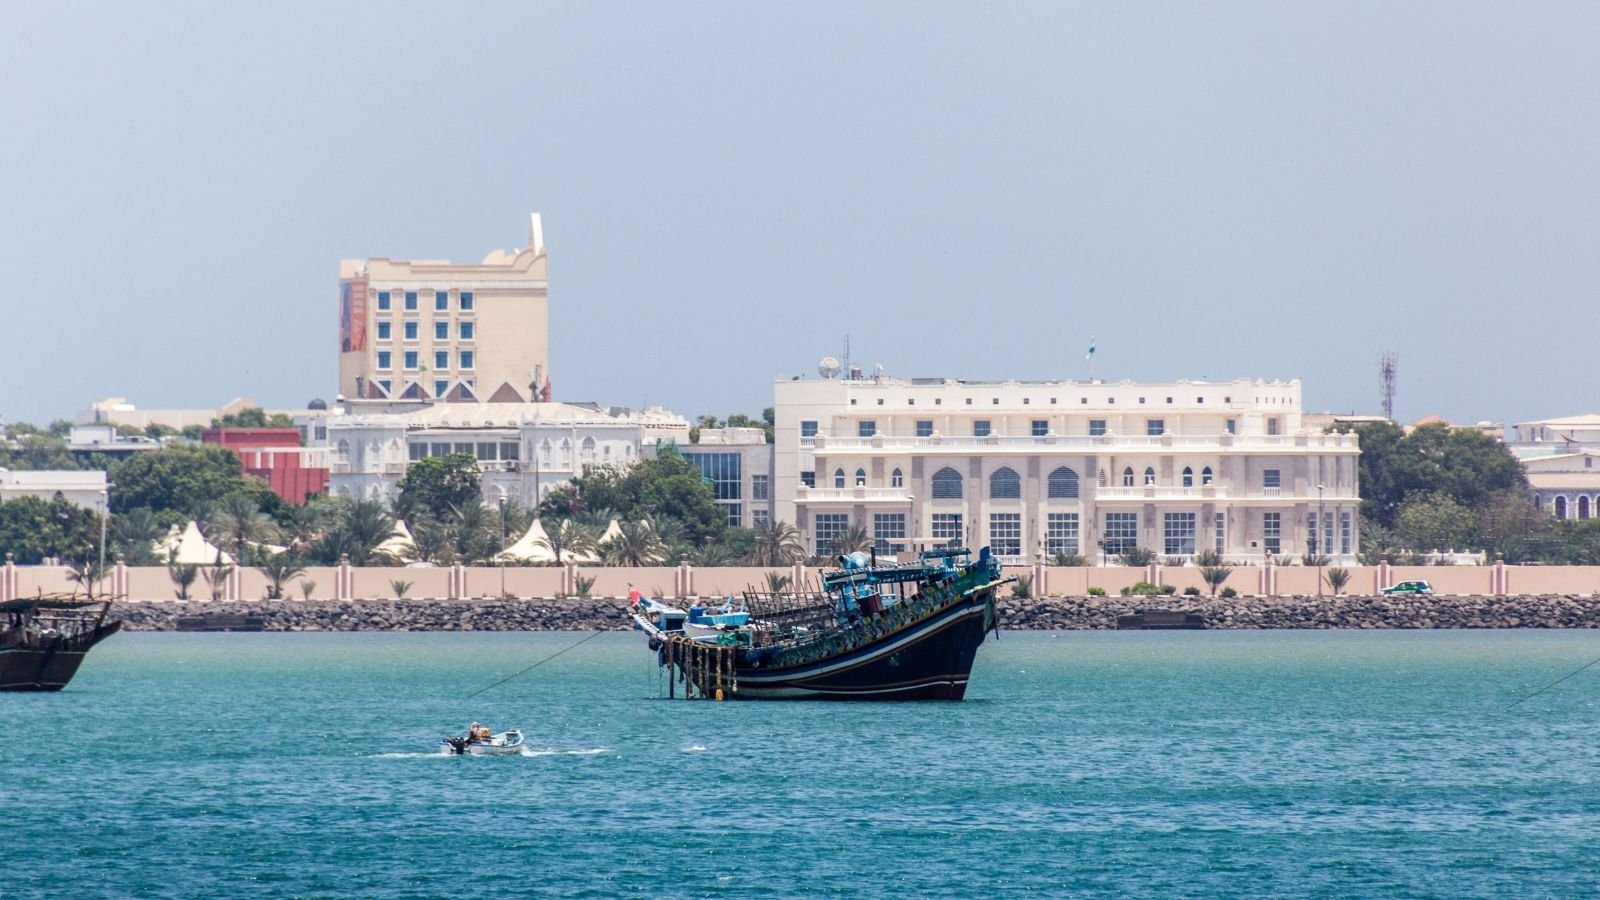 <p>Djibouti is a small but very important country located on the Horn of Africa. It plays a key role in trade, especially for Ethiopia, as<a href="https://qz.com/africa/1272108/ethiopias-djibouti-somaliland-ports-power-dynamics-in-horn-of-africa" rel="noopener"> 95%</a> of Ethiopia’s imports and exports pass through Djibouti’s port. Djibouti has also been recognized as a<a href="https://www.independent.co.uk/travel/africa/djibouti-what-to-see-lonely-planet-africa-travel-2018-lake-assal-ardoukoba-volcano-a8021561.html" rel="noopener"> top travel destination</a>, partly because of its unique and beautiful landscapes. This means that Djibouti is becoming a place that more people will hear about and want to visit.</p>